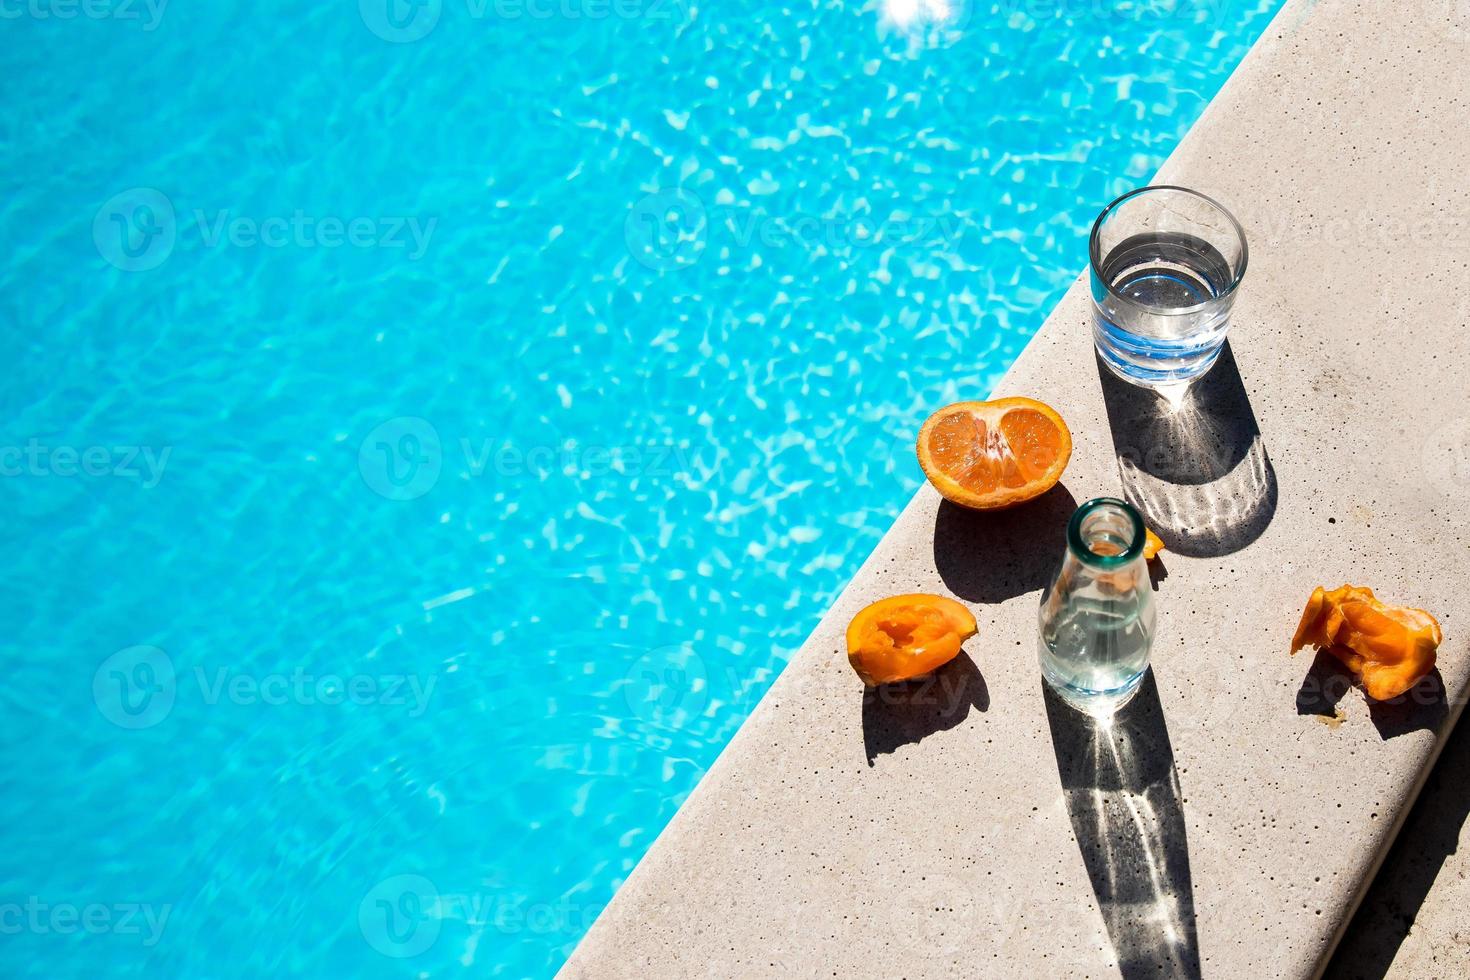 Some glasses and fruits next to the pool photo